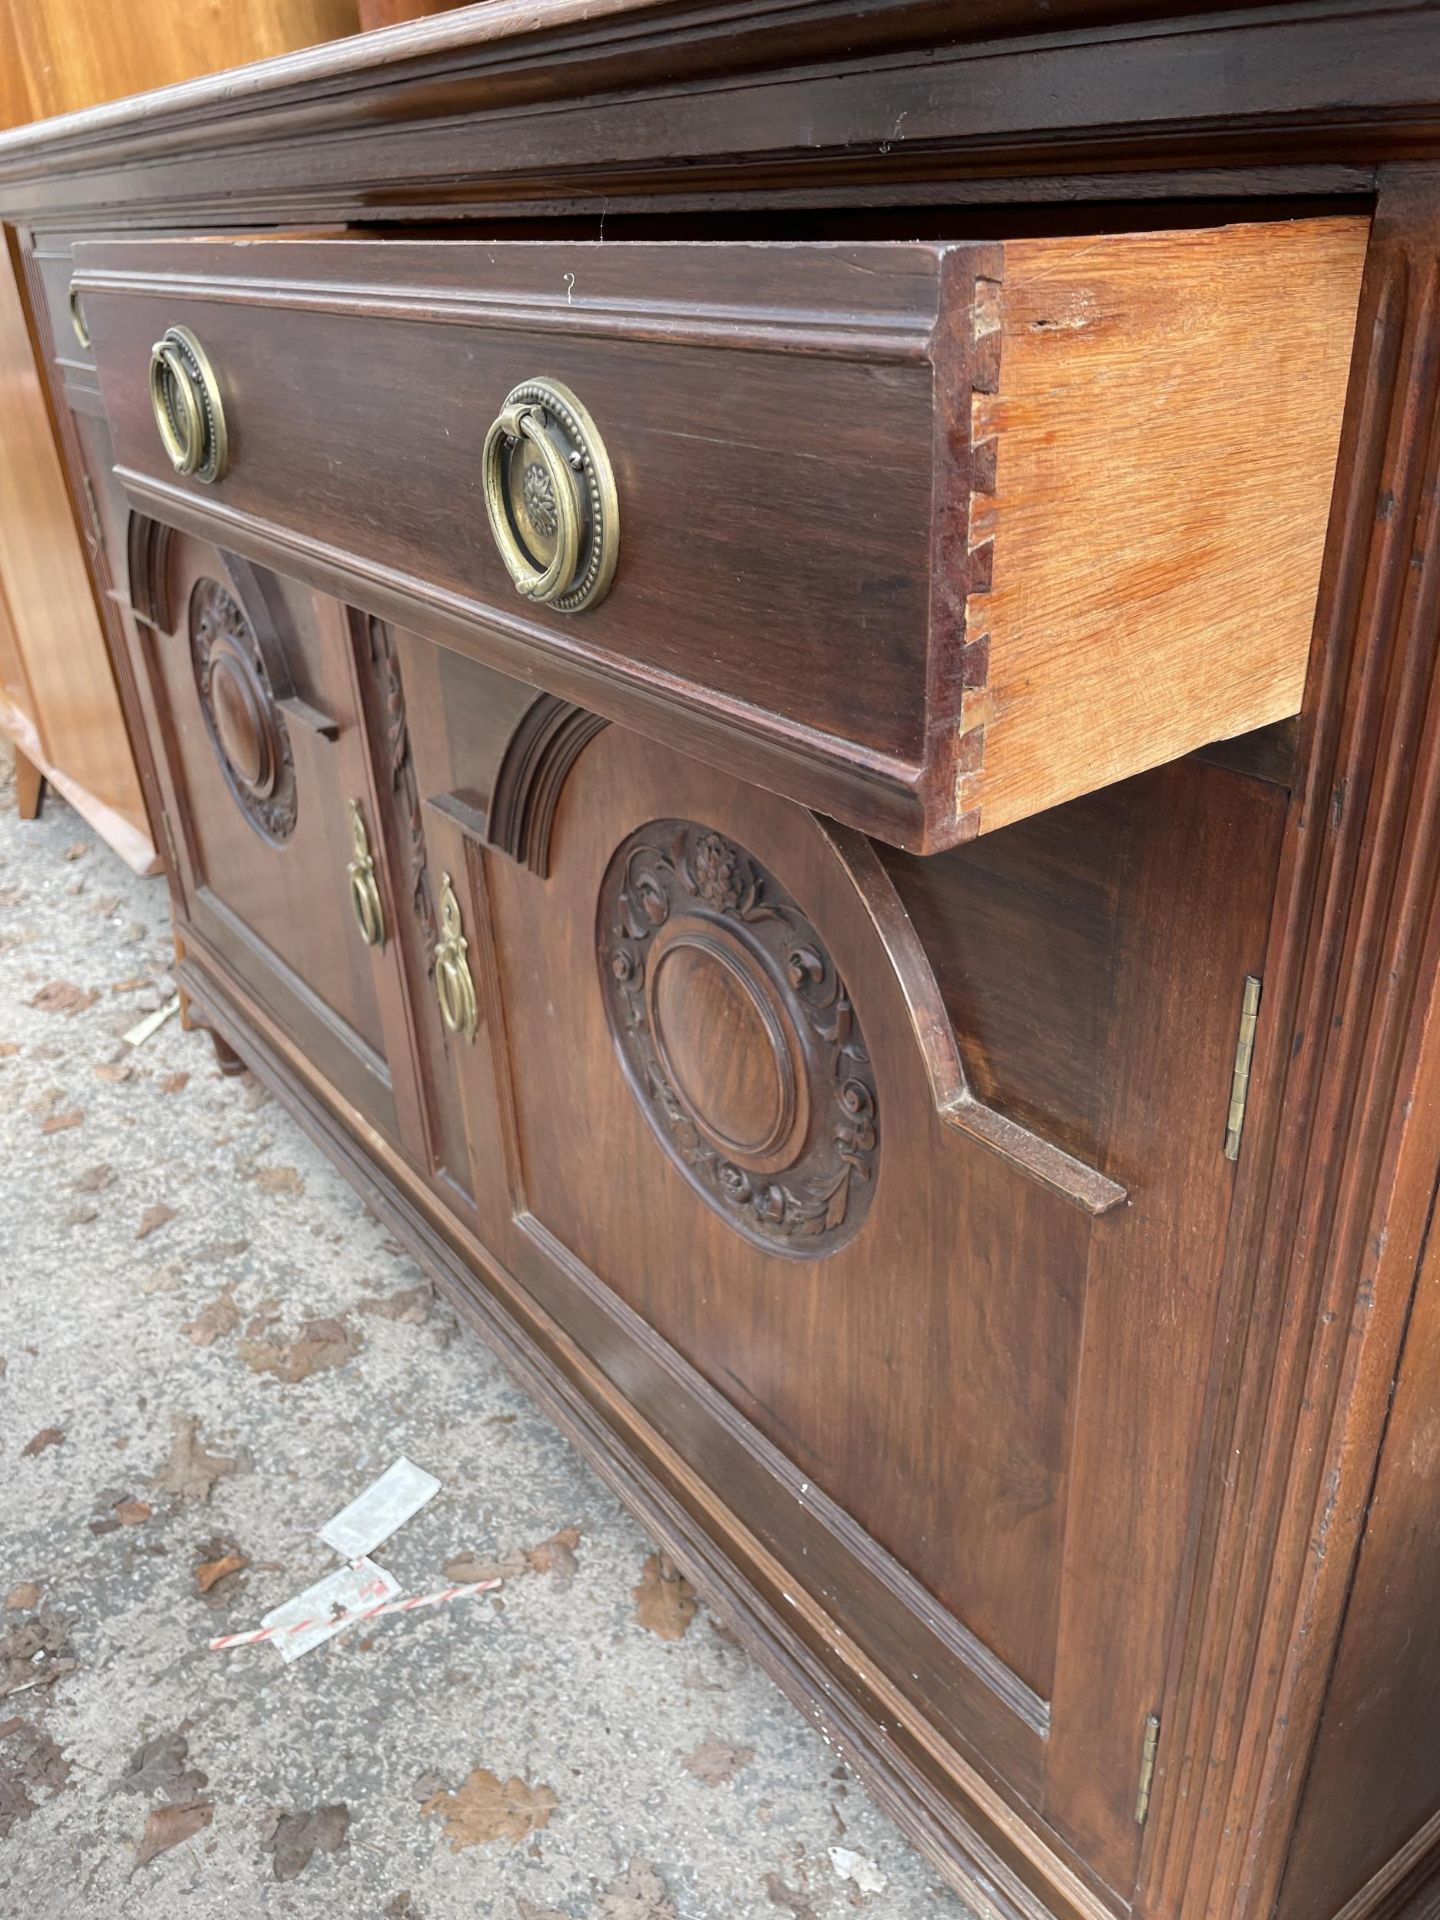 A LATE VICTORIAN MIRROR BACK SIDEBOARD WITH FLUTED COLUMNS AND CARVED PANEL DOORS TO BASE 62" WIDE - Image 4 of 8